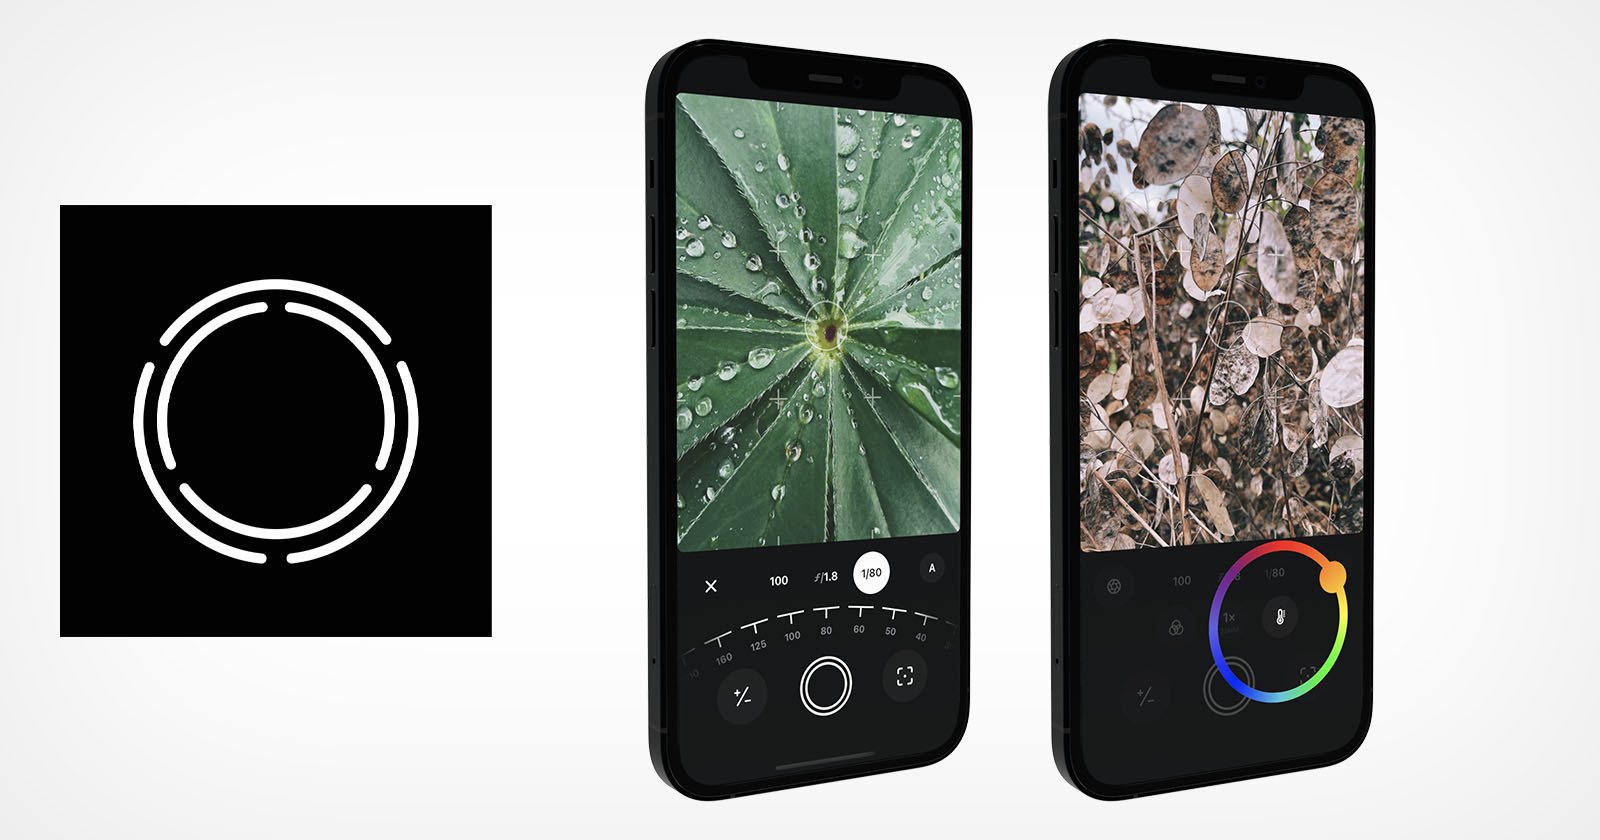 Obscura 3 Camera App is a Major Update with New Modes and Design